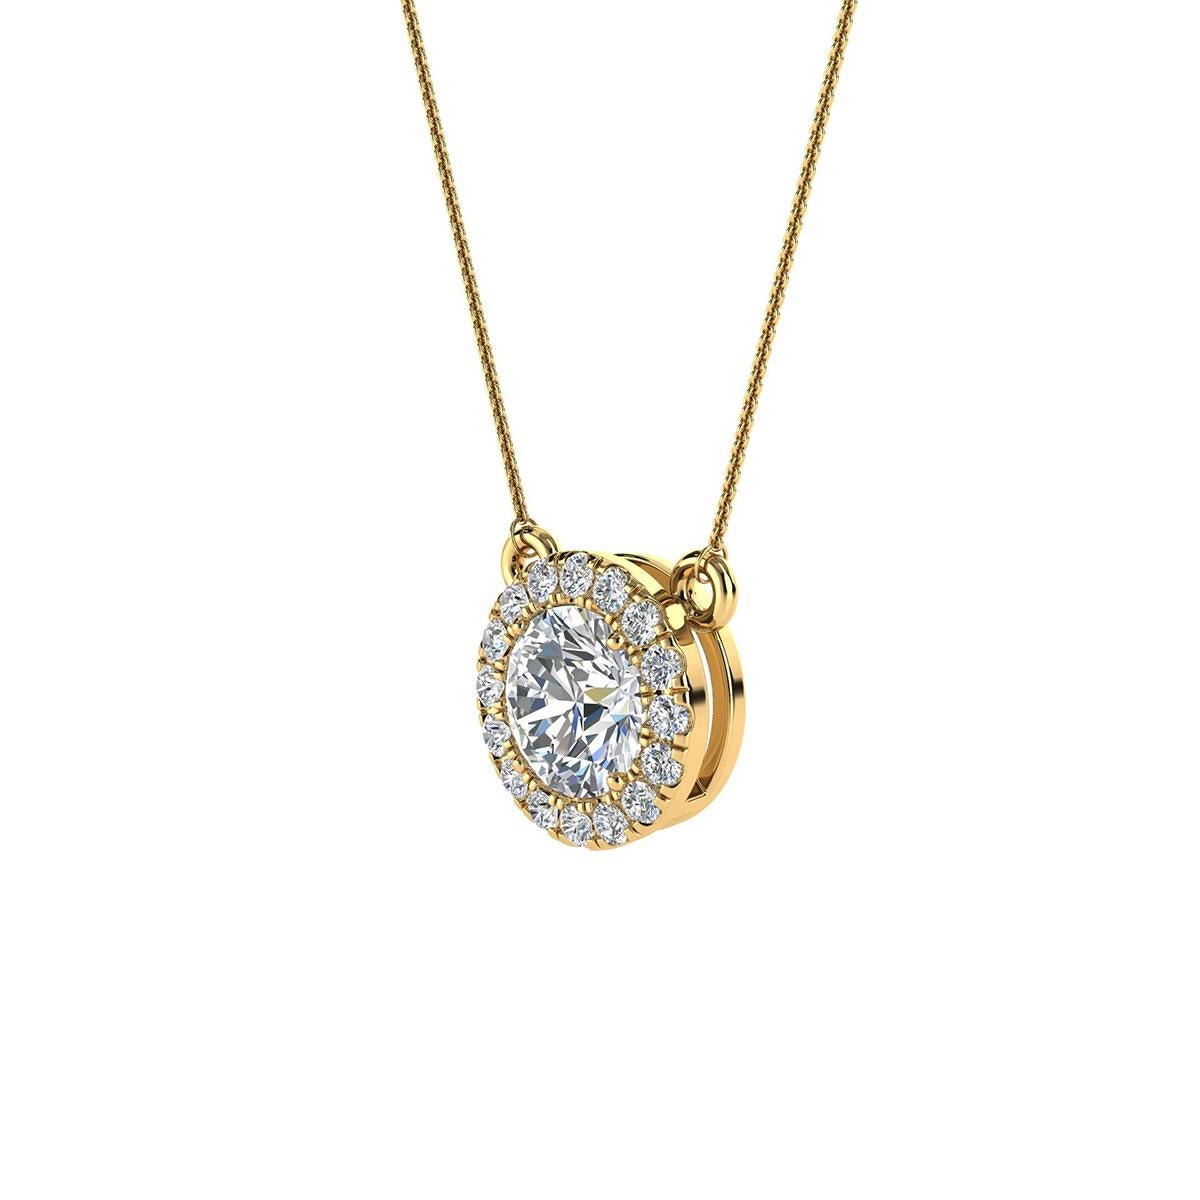 This delicate pendant features one round shaped diamonds that are approximately 0.54-carat total weight (5.2 mm) encircled by a halo of perfectly matched 16 brilliant round diamonds in about 0.17-carat total weight. The earrings are measuring at 8.6